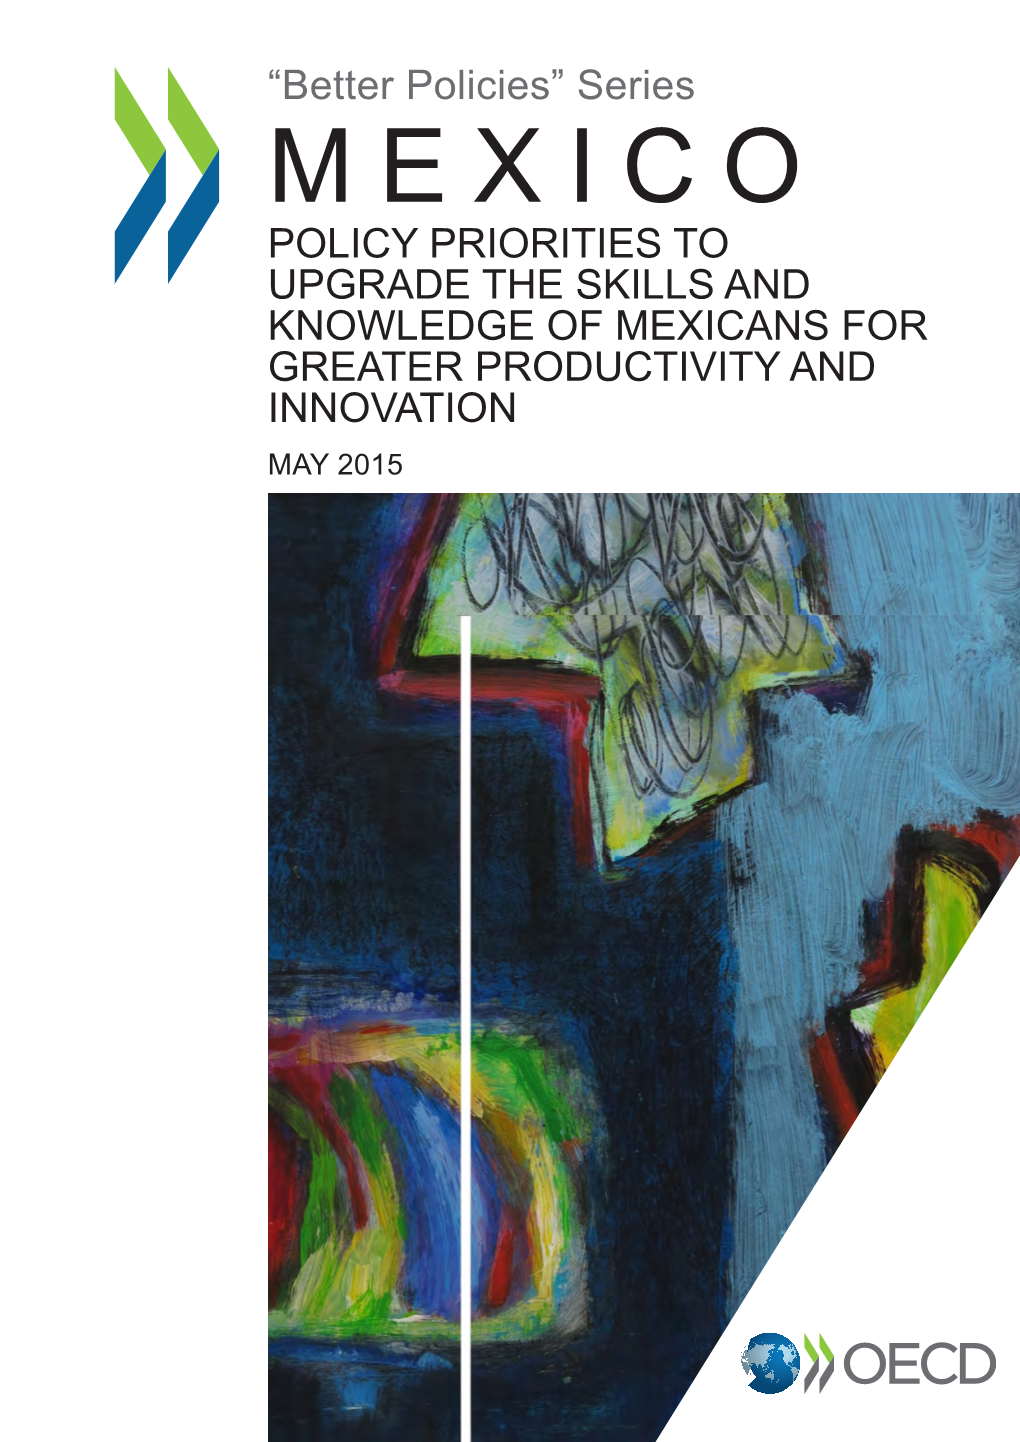 Mexico Policy Priorities to Upgrade the Skills and Knowledge of Mexicans for Greater Productivity and Innovation May 2015